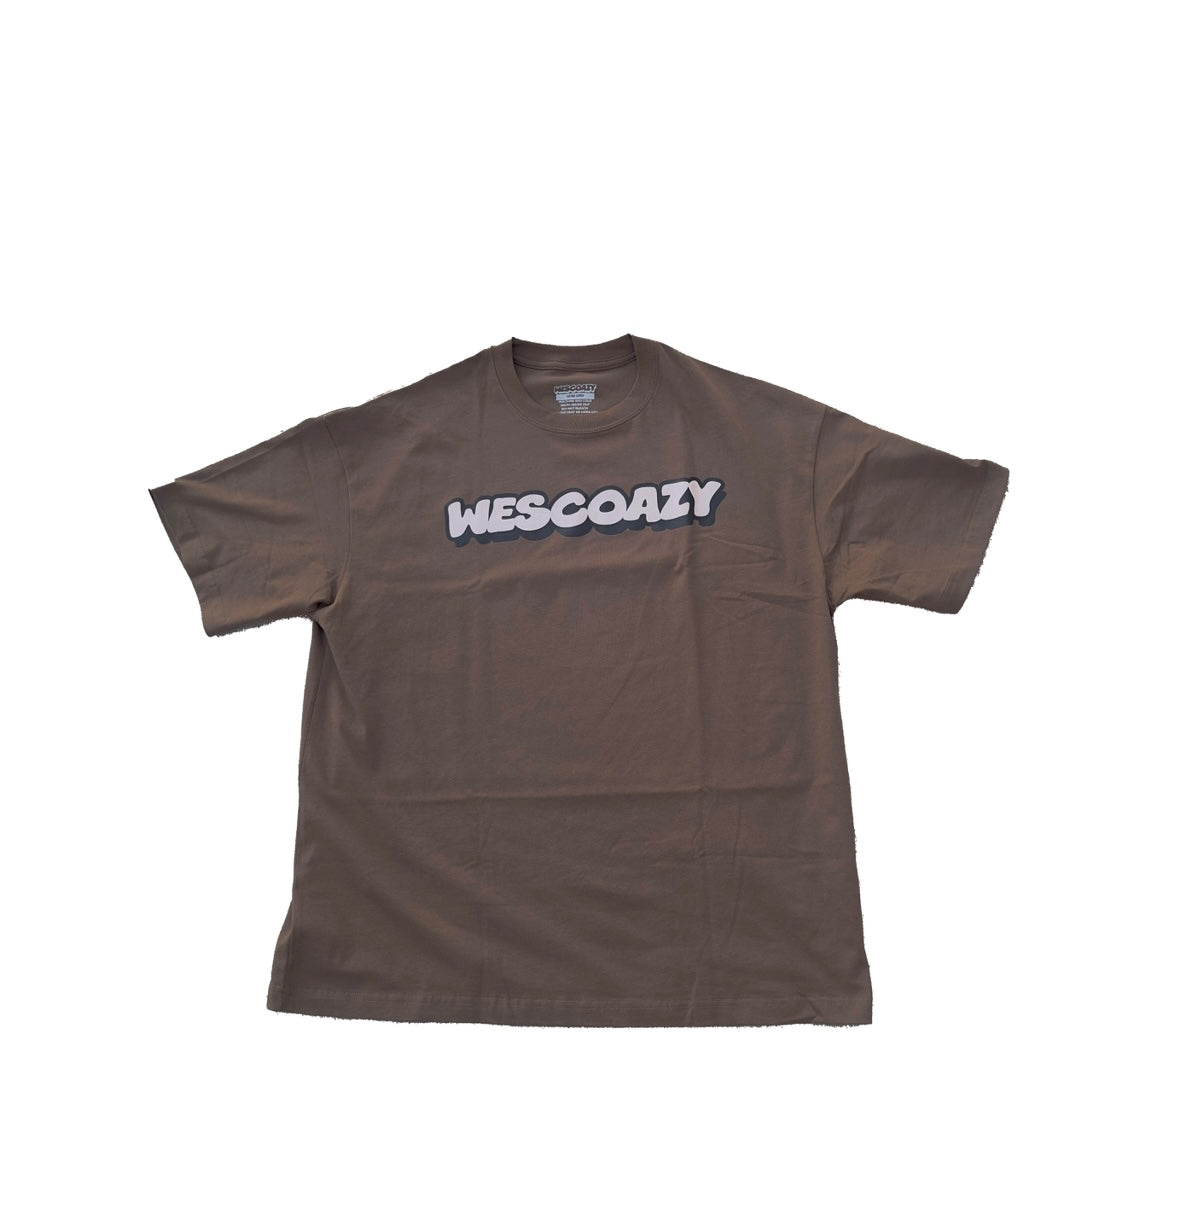 WESCOAZY BROWN T SHIRT